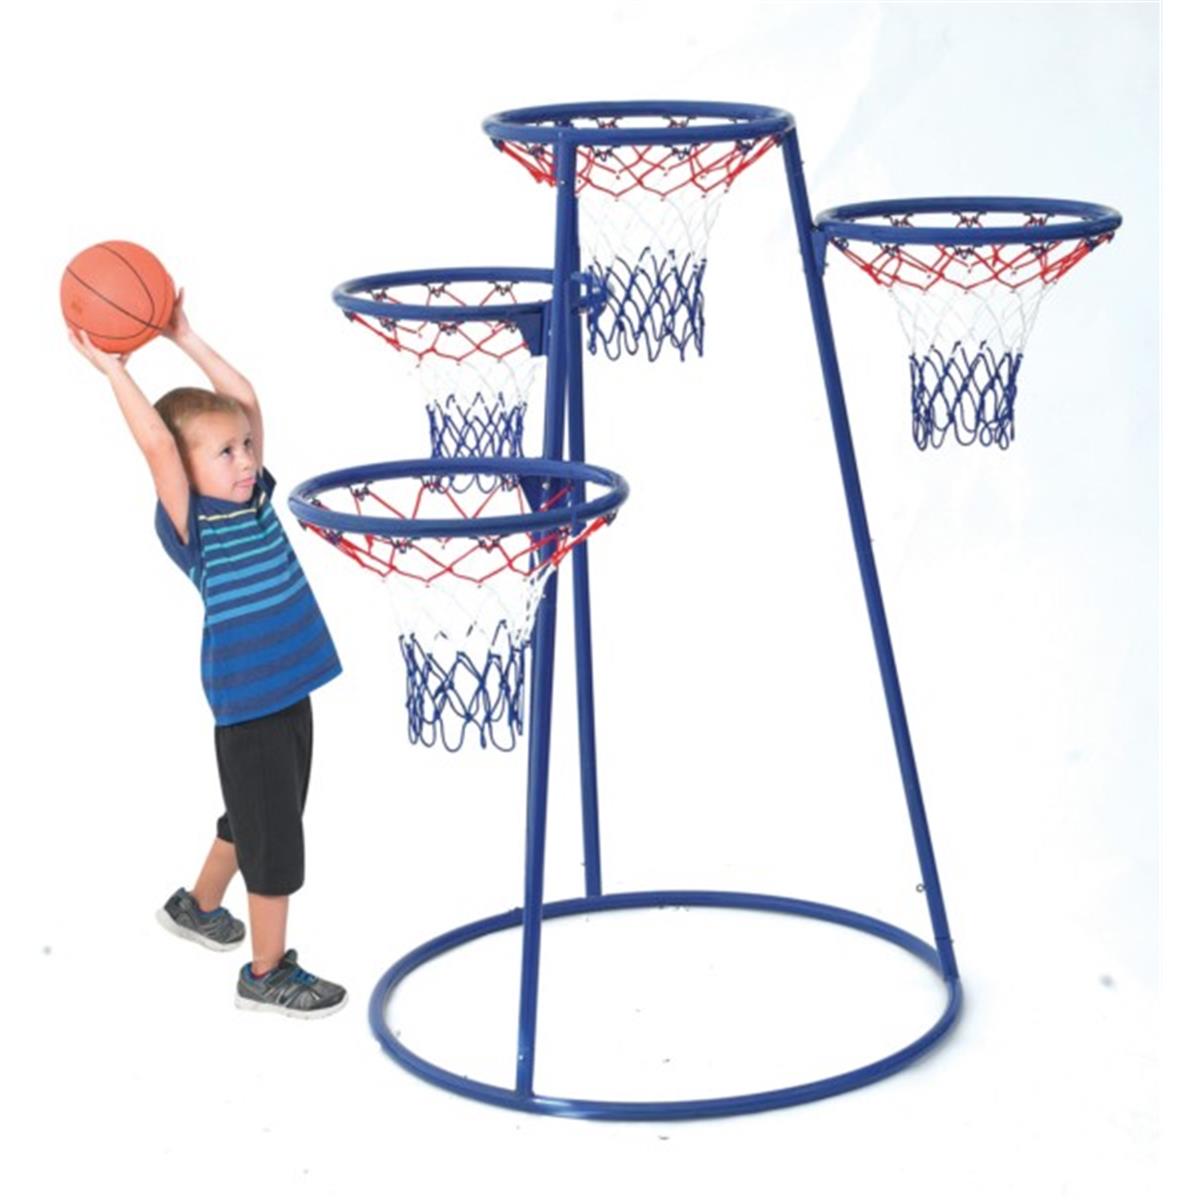 Afb7950 4-rings Basketball Stand With Storage Bag